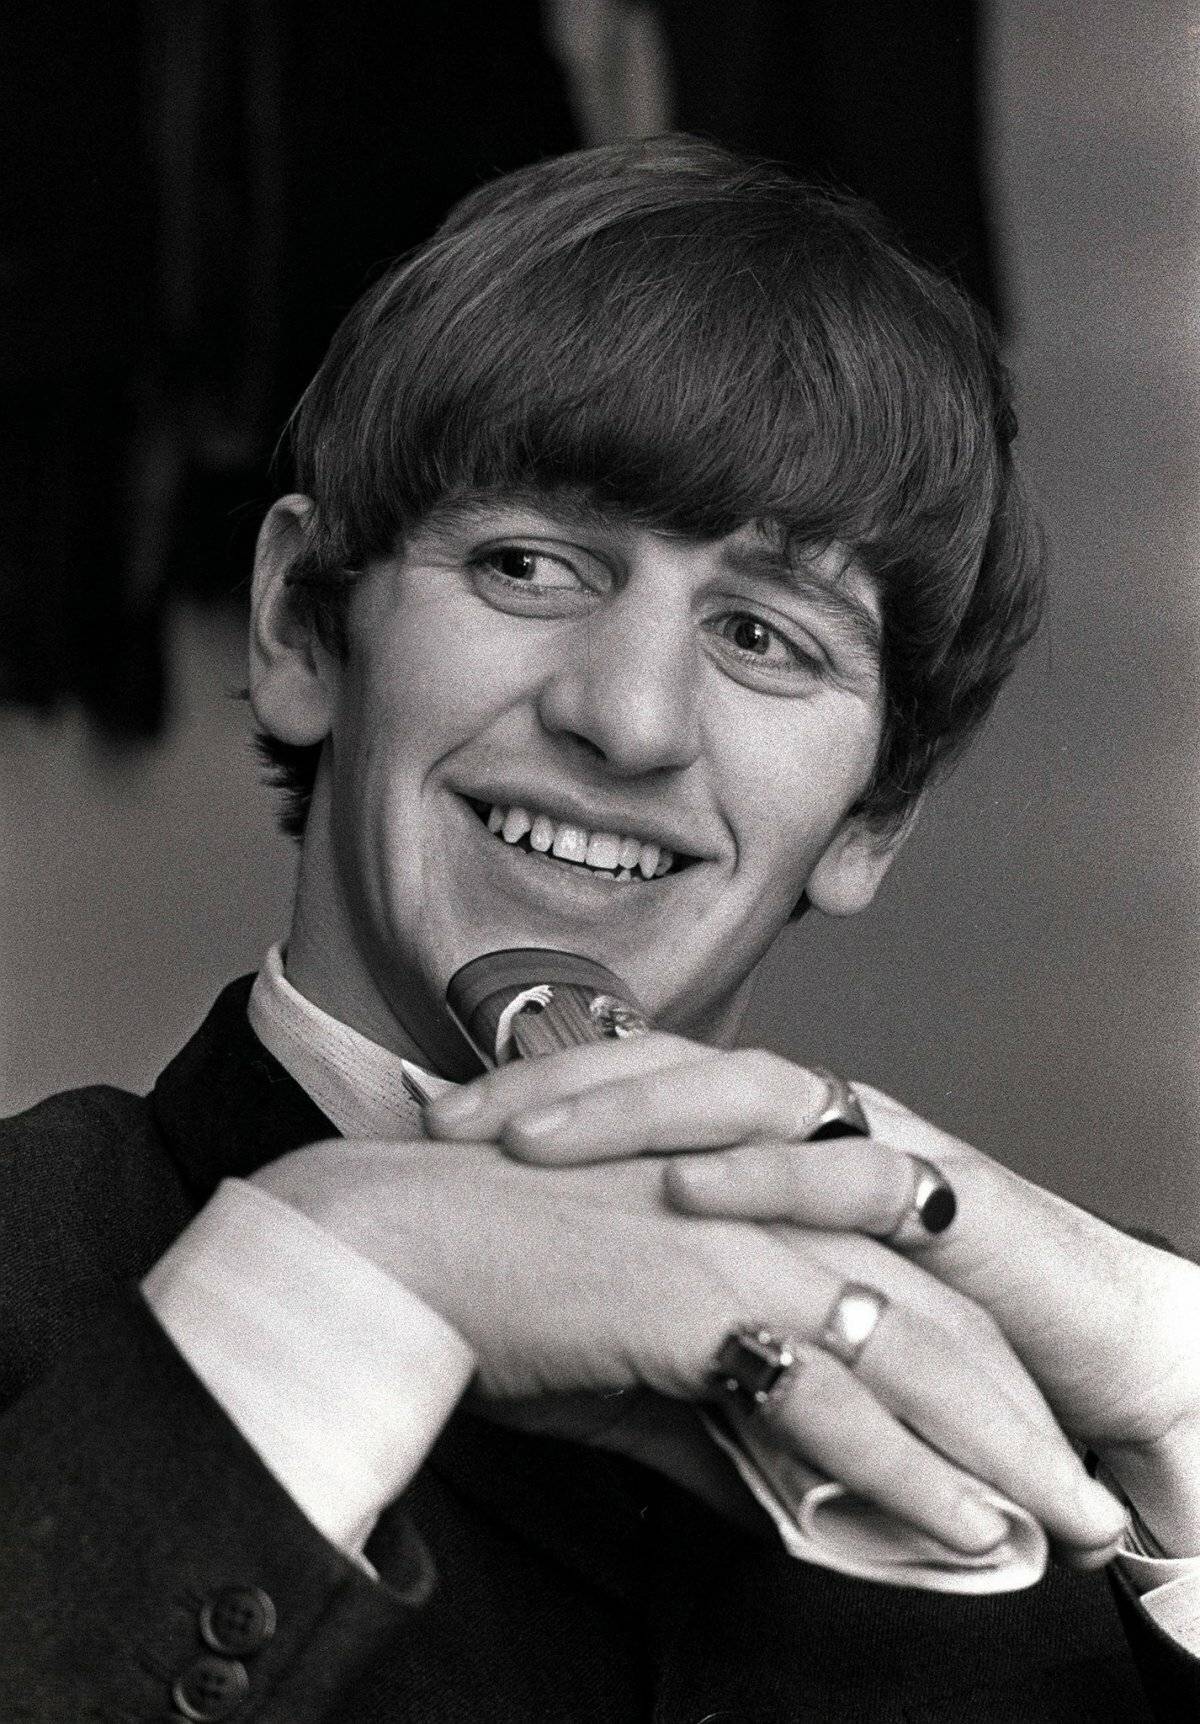 Ringo Starr at a young age...